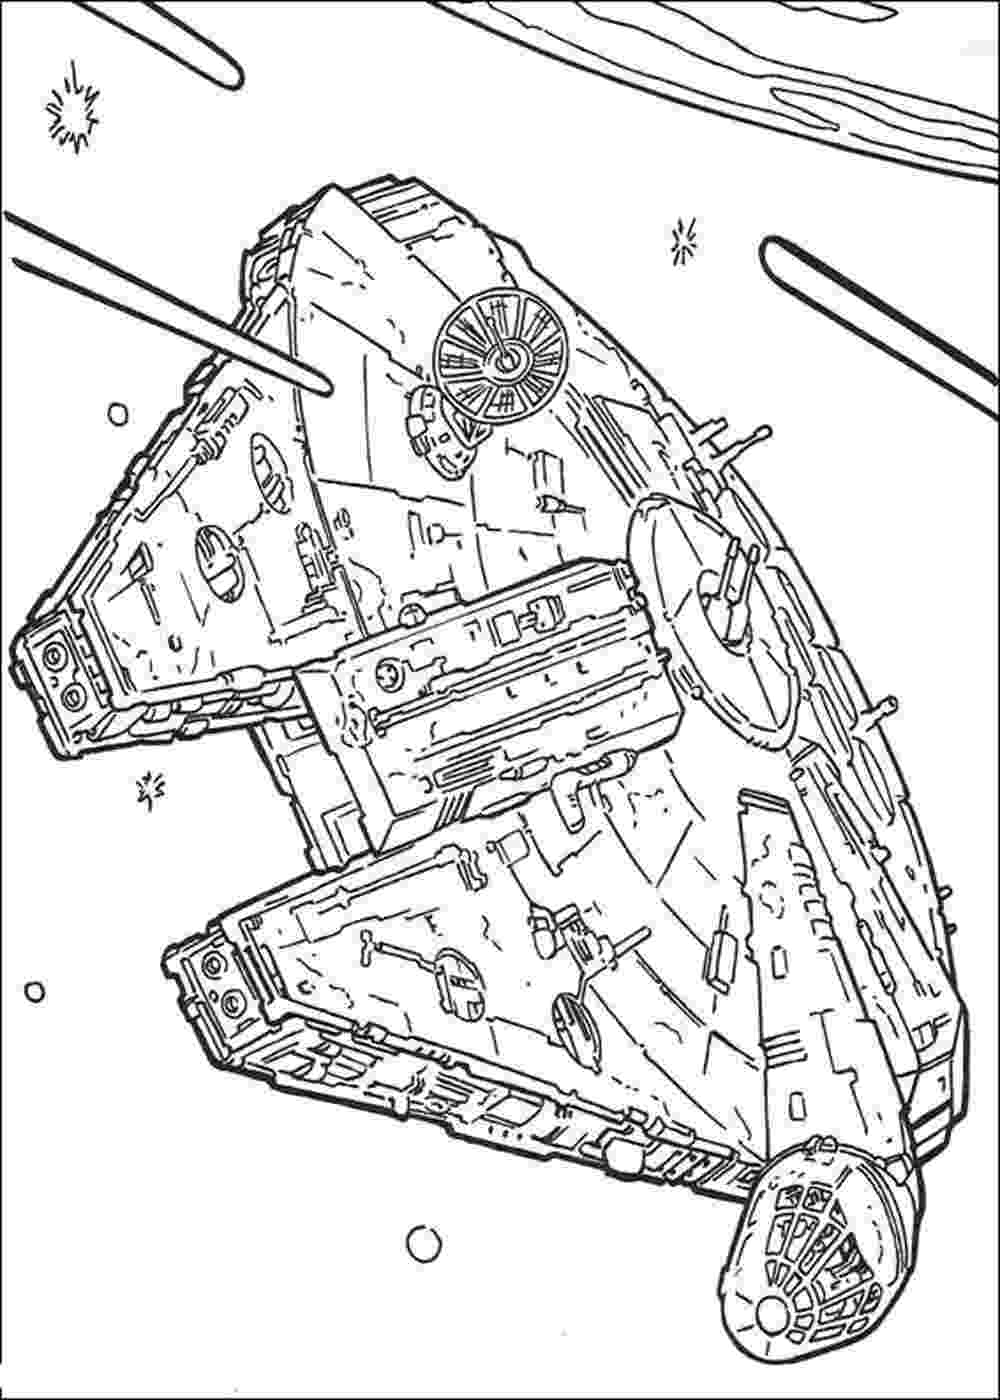 lego starwars coloring pages lego star wars coloring pages to download and print for free starwars lego coloring pages 